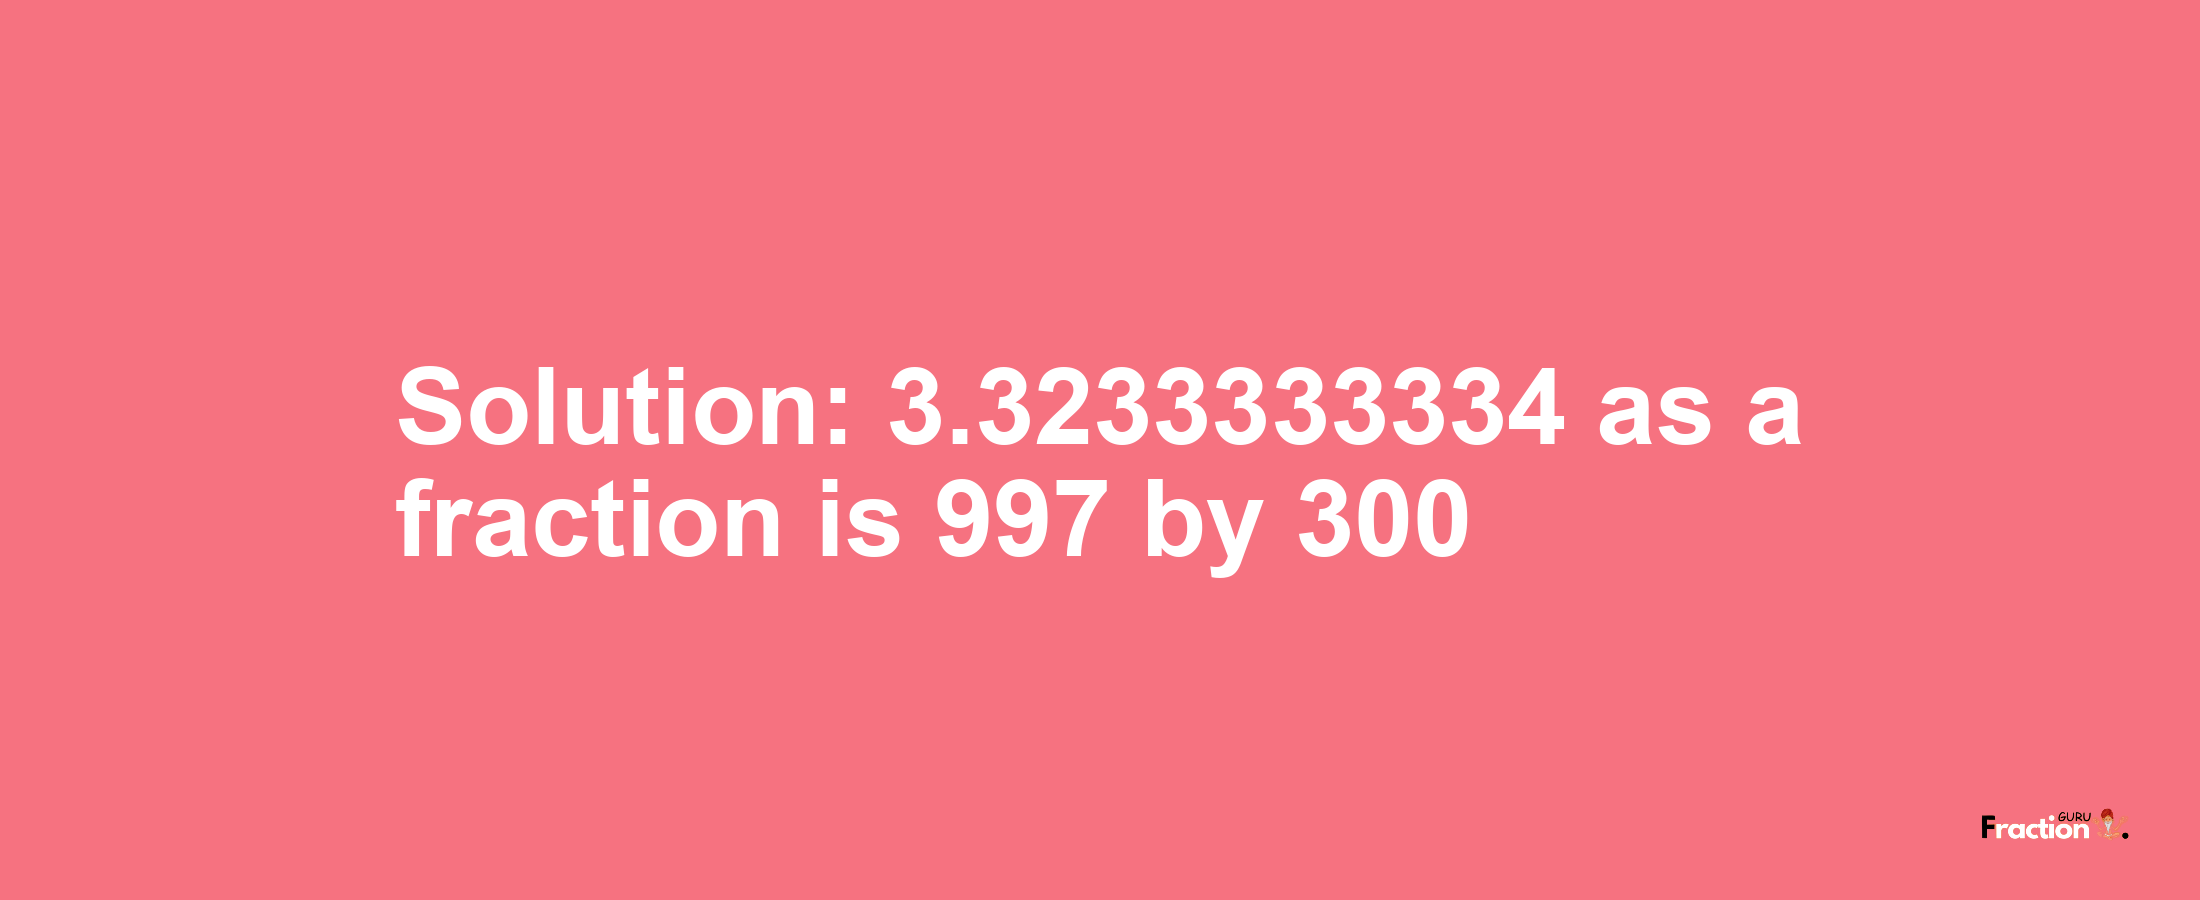 Solution:3.3233333334 as a fraction is 997/300